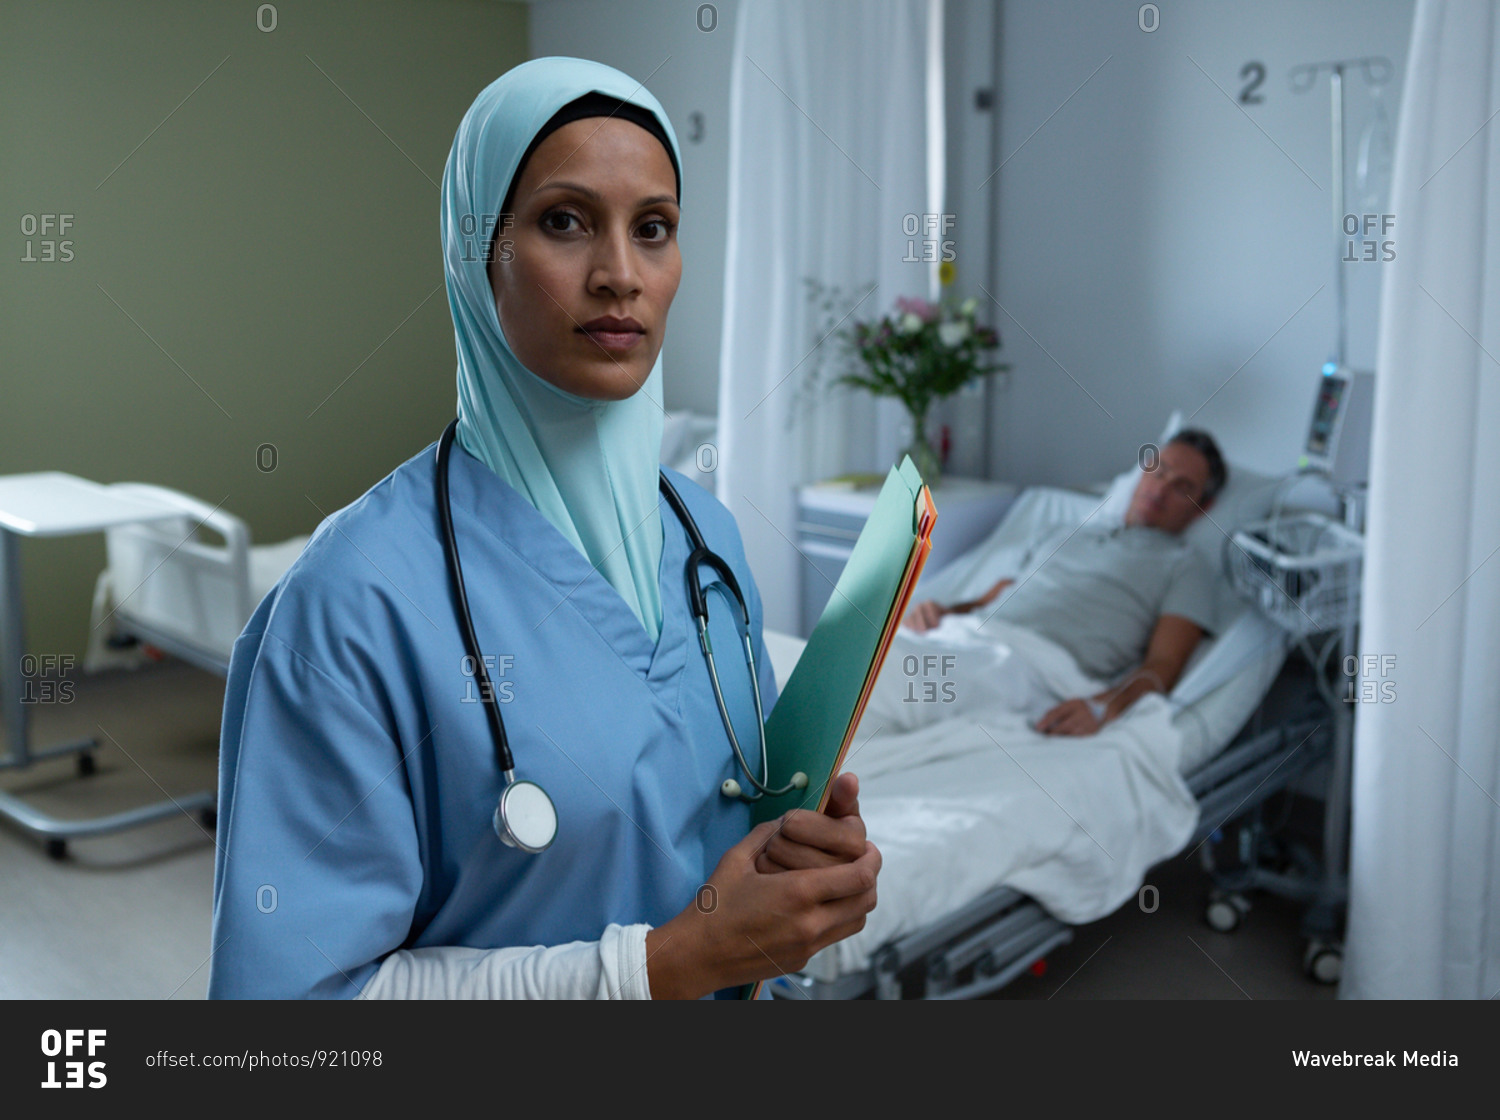 Portrait of beautiful mixed race female in hijab doctor standing with medical report while Caucasian male patient sleeps in the background in the hospital. Shot in real medical hospital with doctors nurses and surgeons in authentic setting